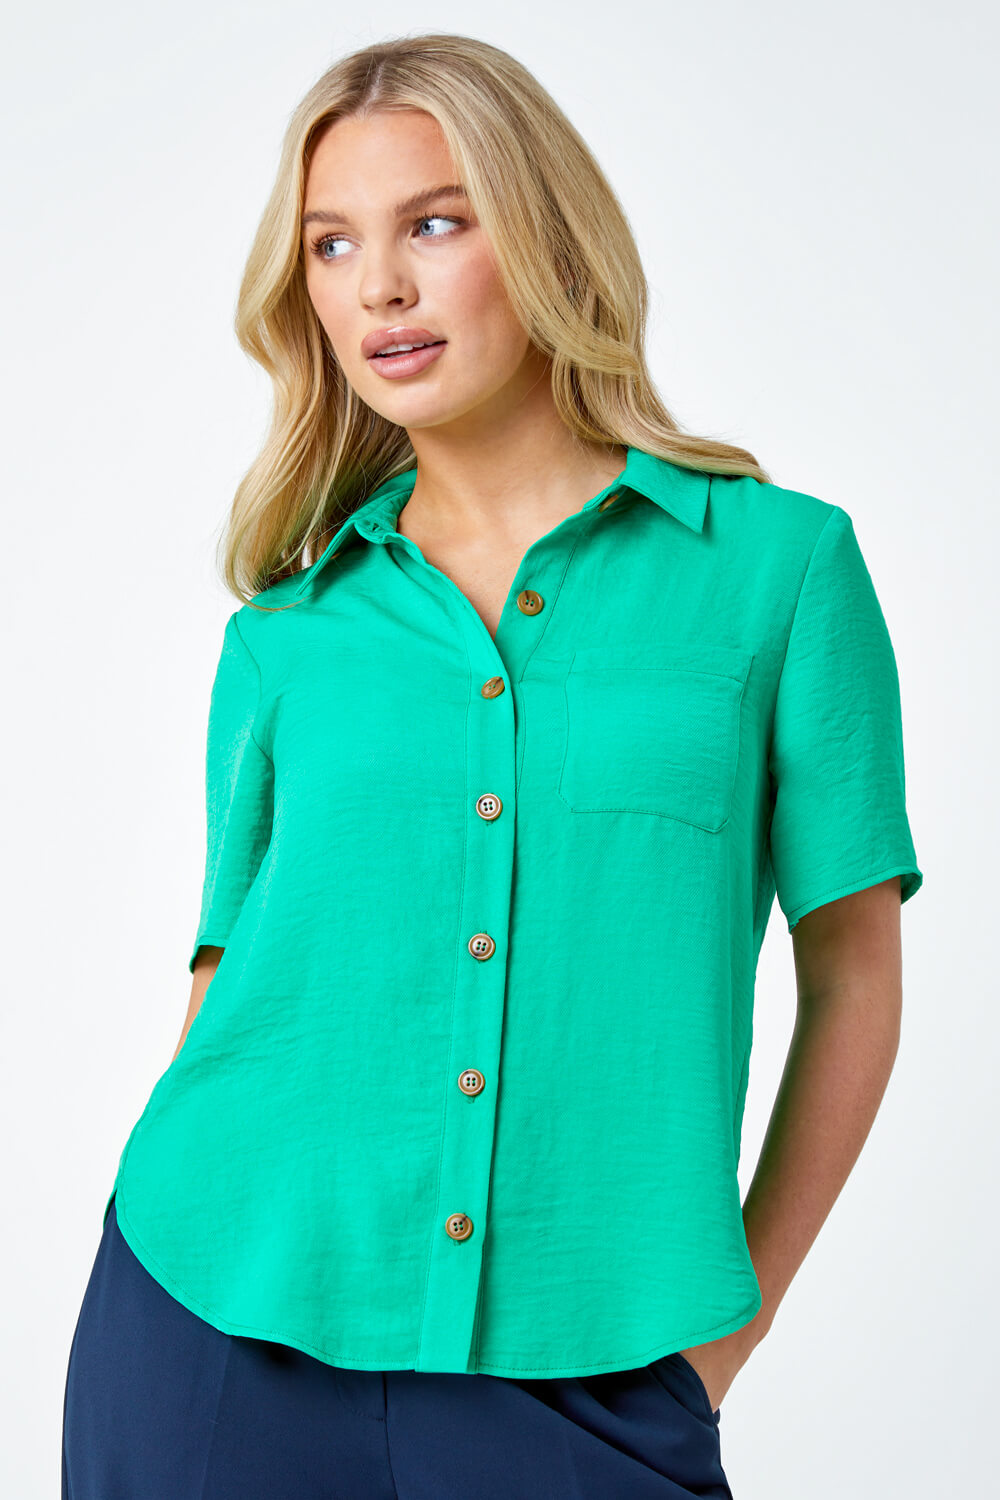 Green Petite Button Up Pocket Shirt, Image 4 of 5